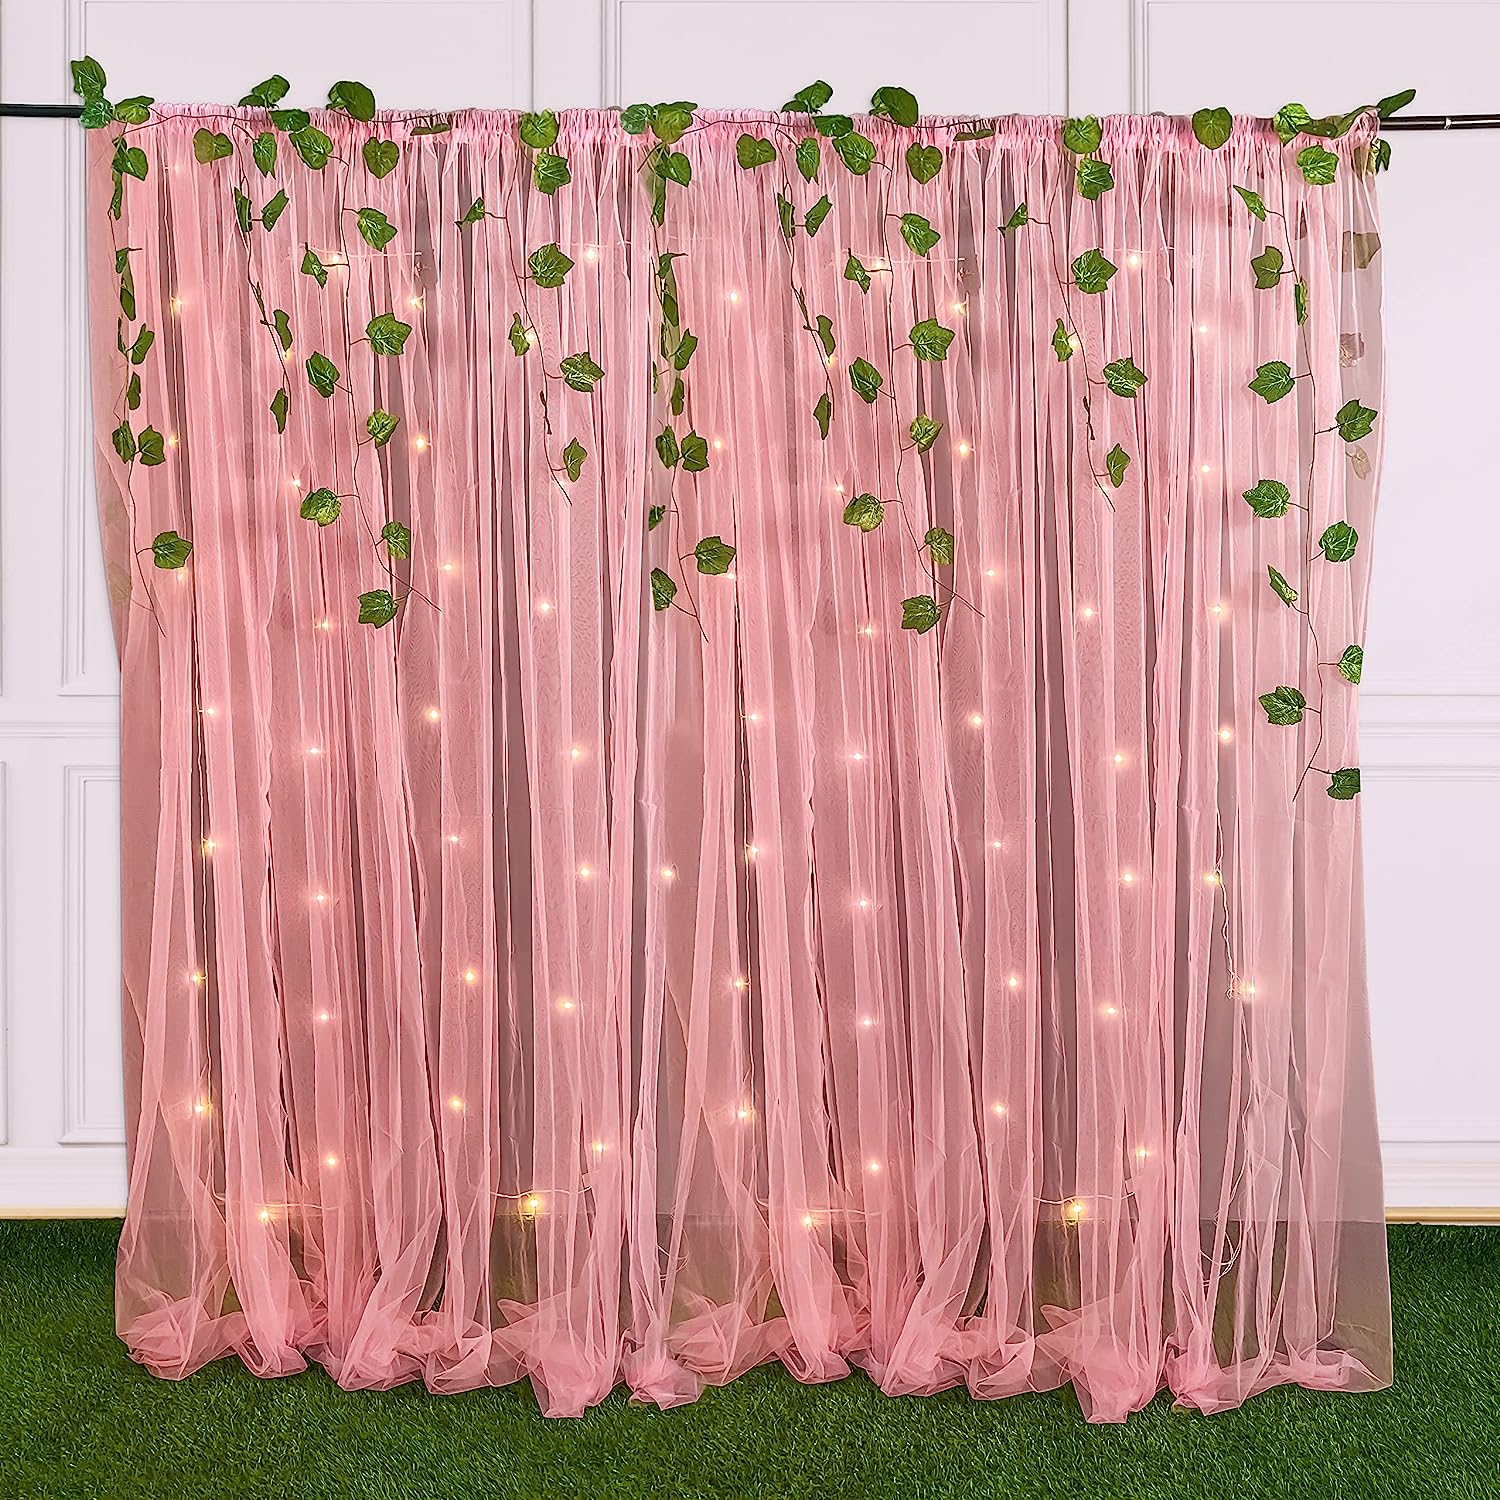 Brighten your décor with a pink backdrop